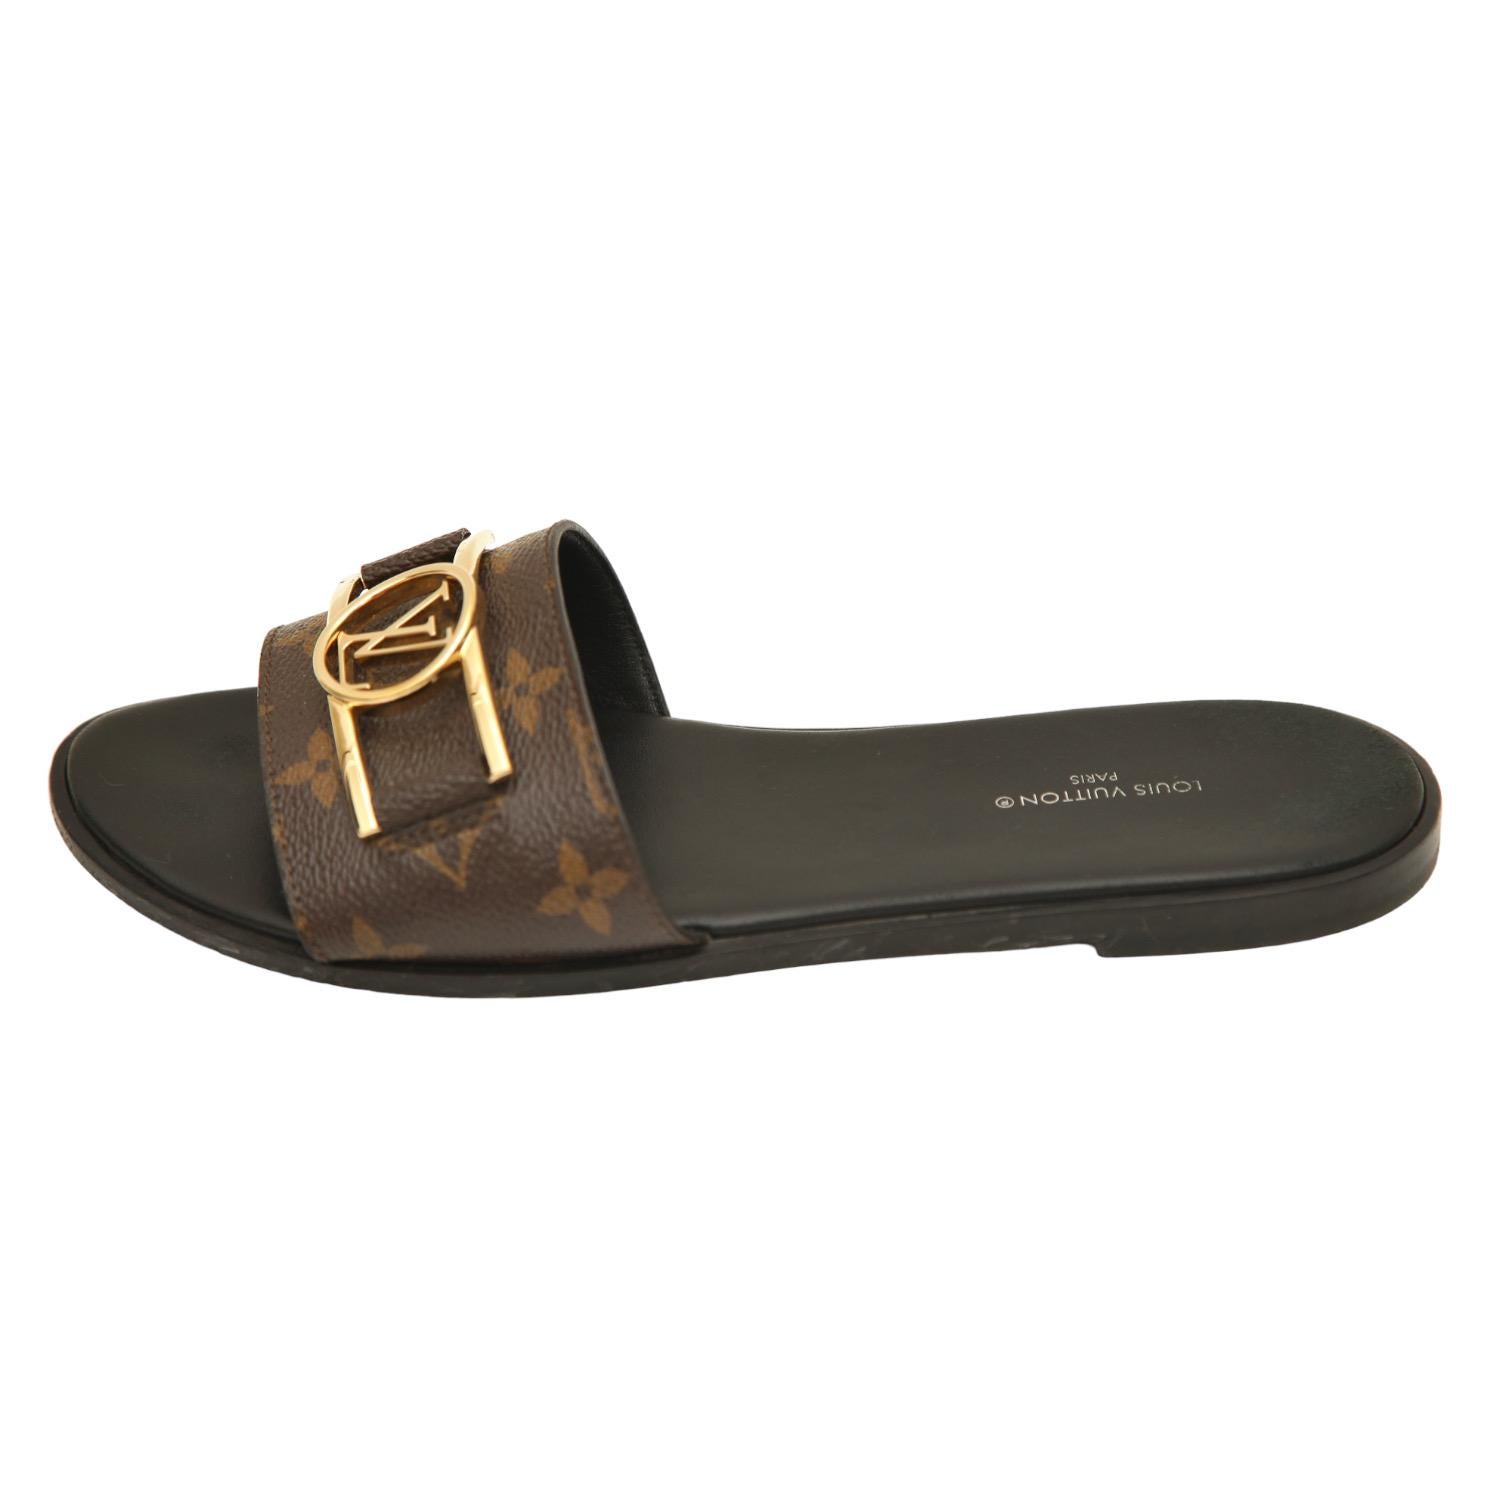 LOUIS VUITTON Sandal Slide LOCK IT Flat Mule Monogram Canvas Leather Sz 38 $980 In Good Condition In Hollywood, FL